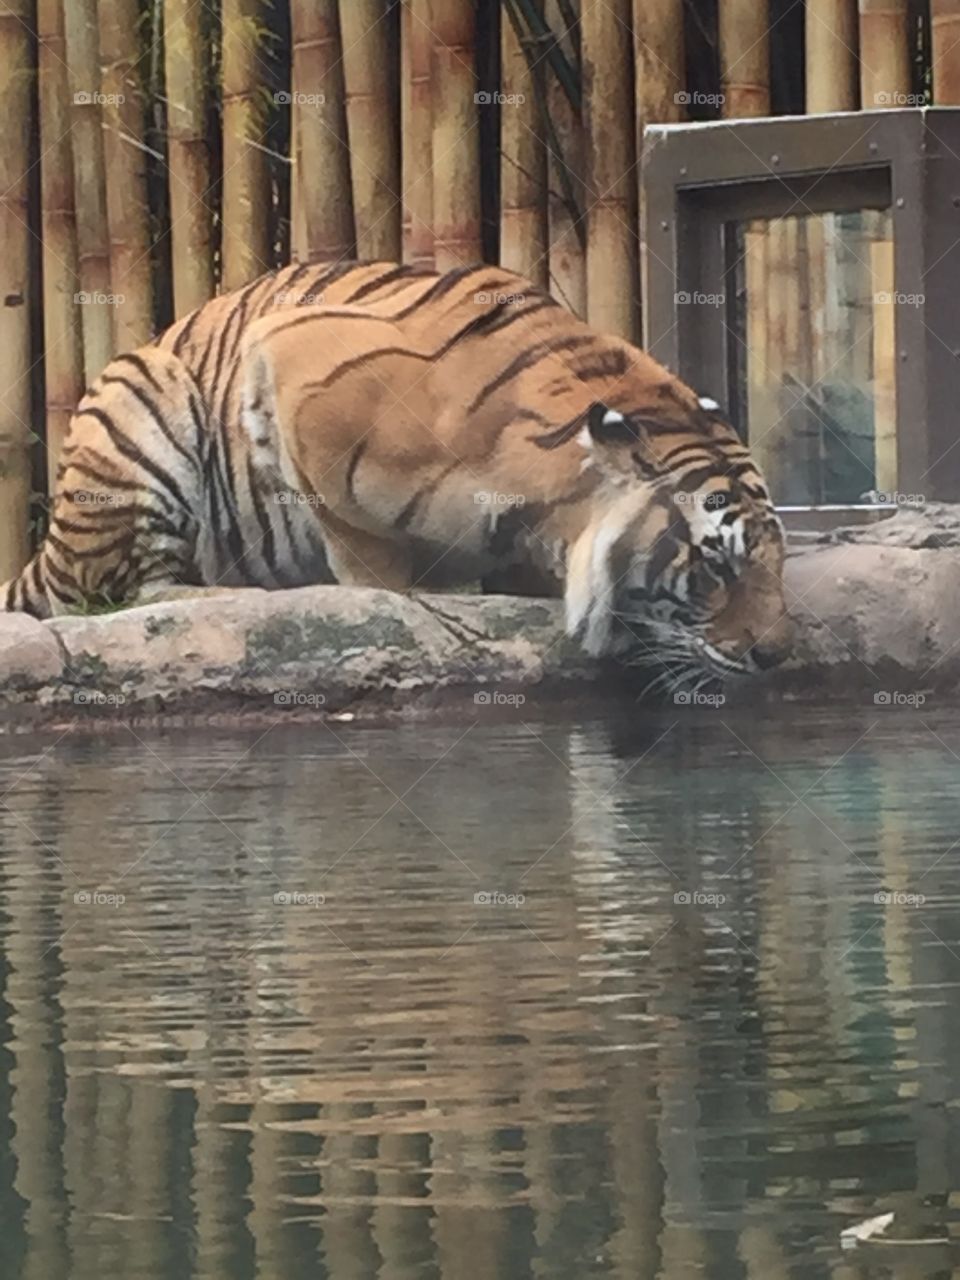 A tiger keeping up with his health by drinking plenty of water a day. Good job buddy!!!